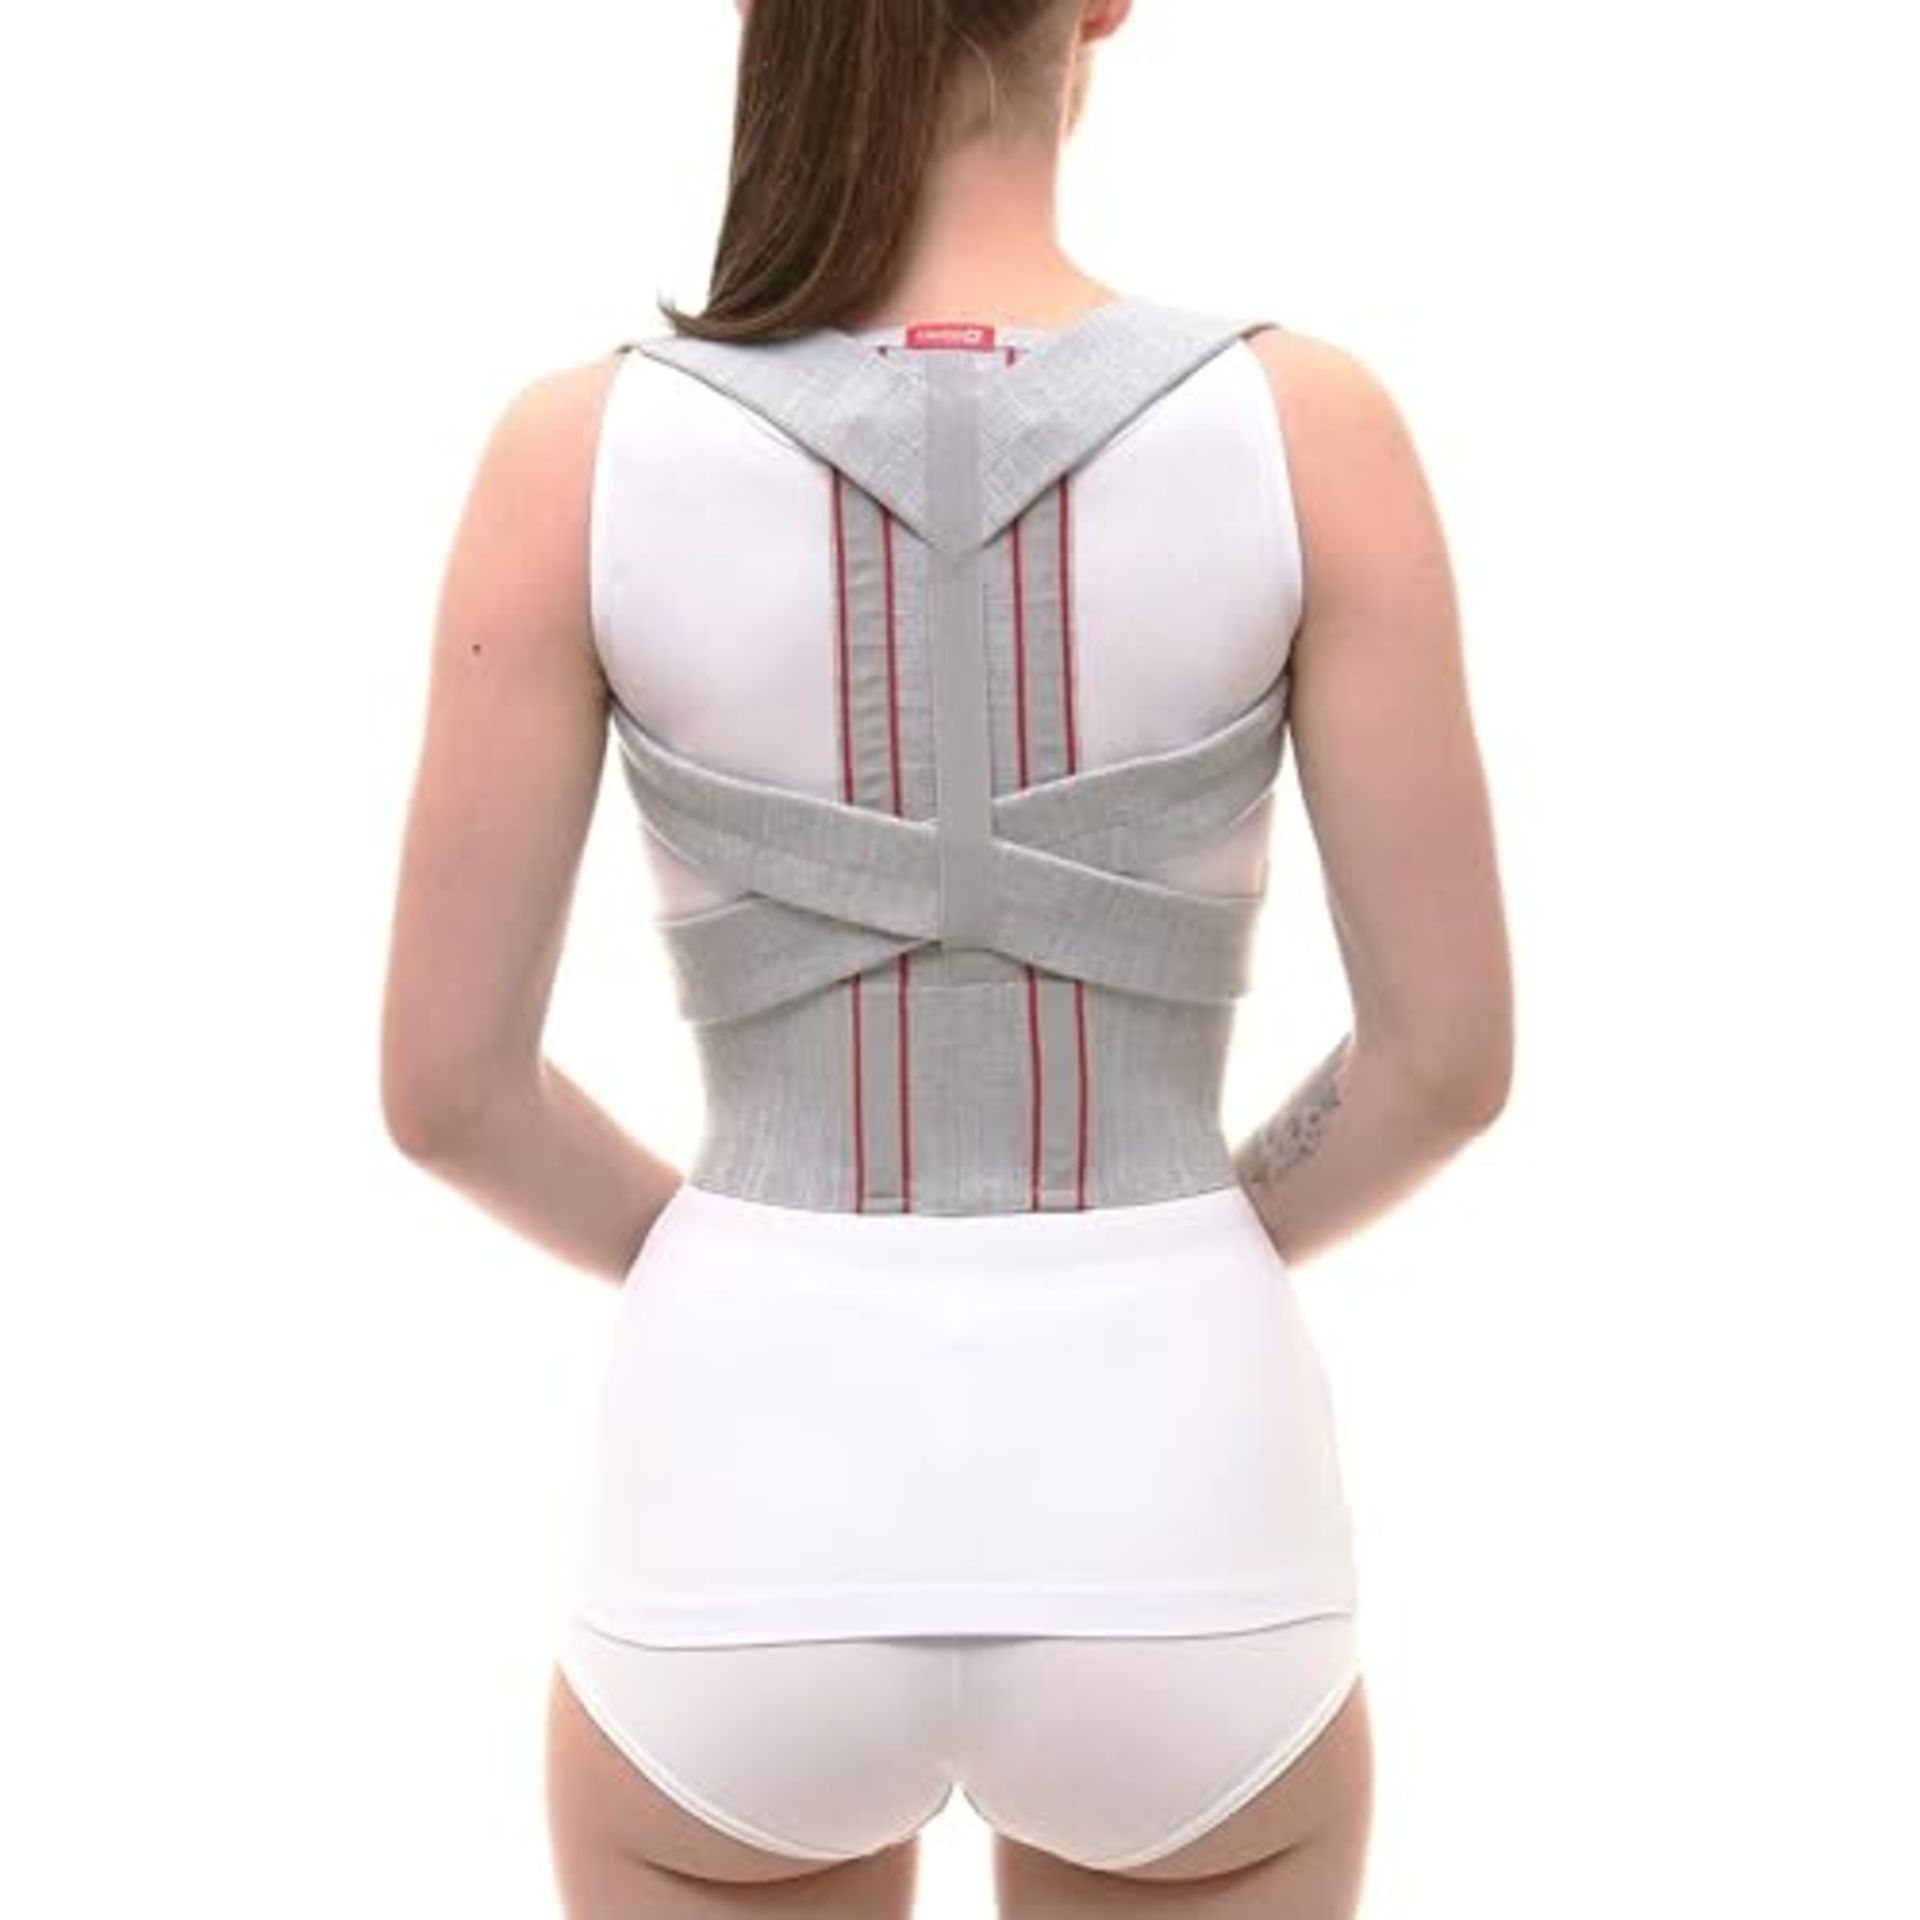 Lauma Medical, Posture Corrector with Metal Inserts for Women and Men, Adjustable, Breathable, Pain